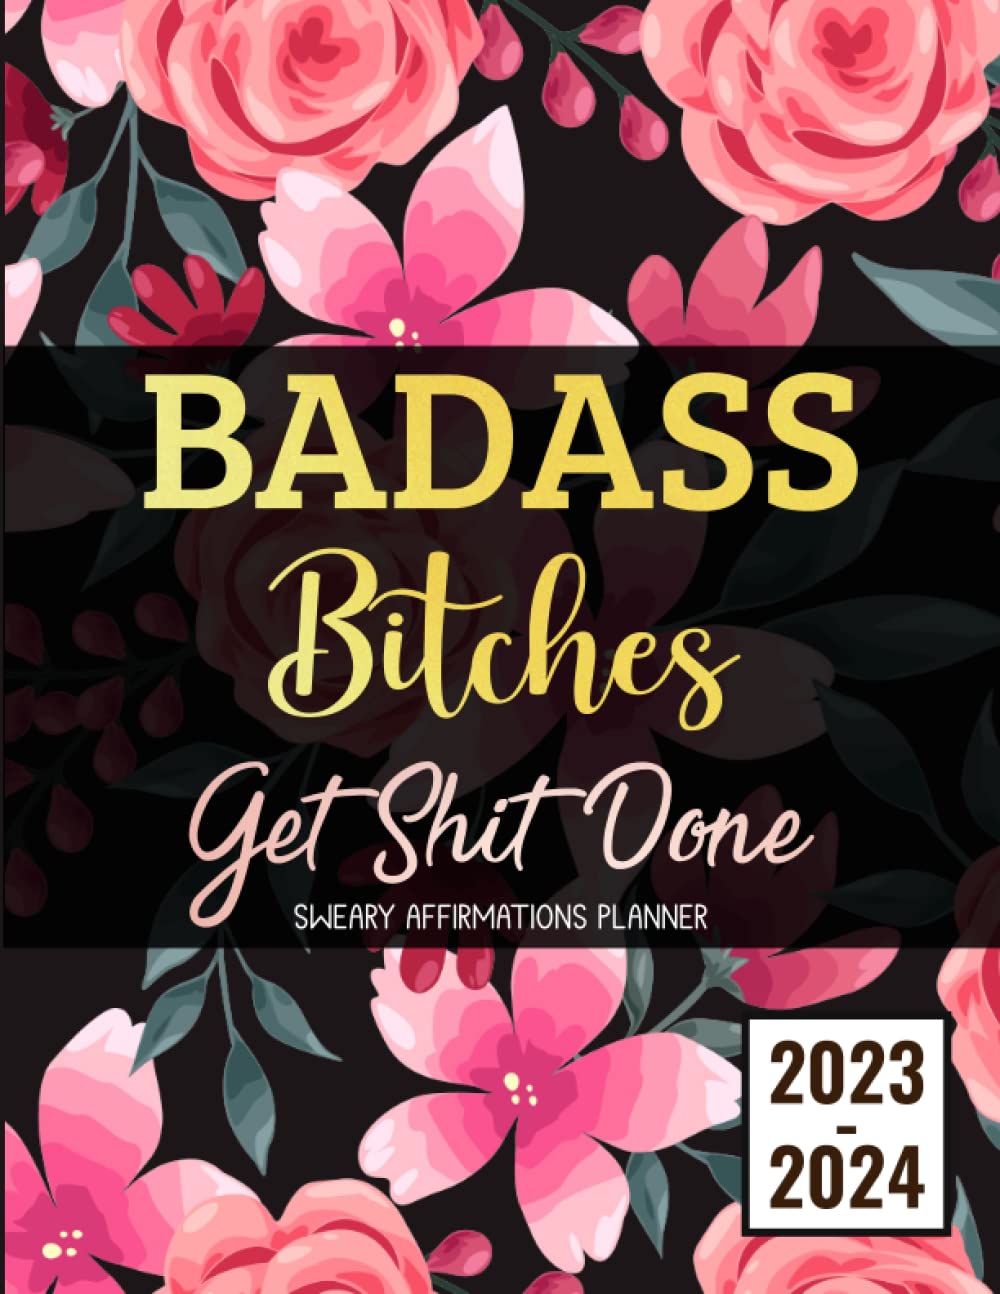 Badass Bitches Get Shit Done Sweary Affirmations Planner 2023-2024: 2 Year Monthly Organizer with Funny Inspirational Cuss Word Motivational Quotes, ... To Do Lists, Habit Tracker, Important Dates